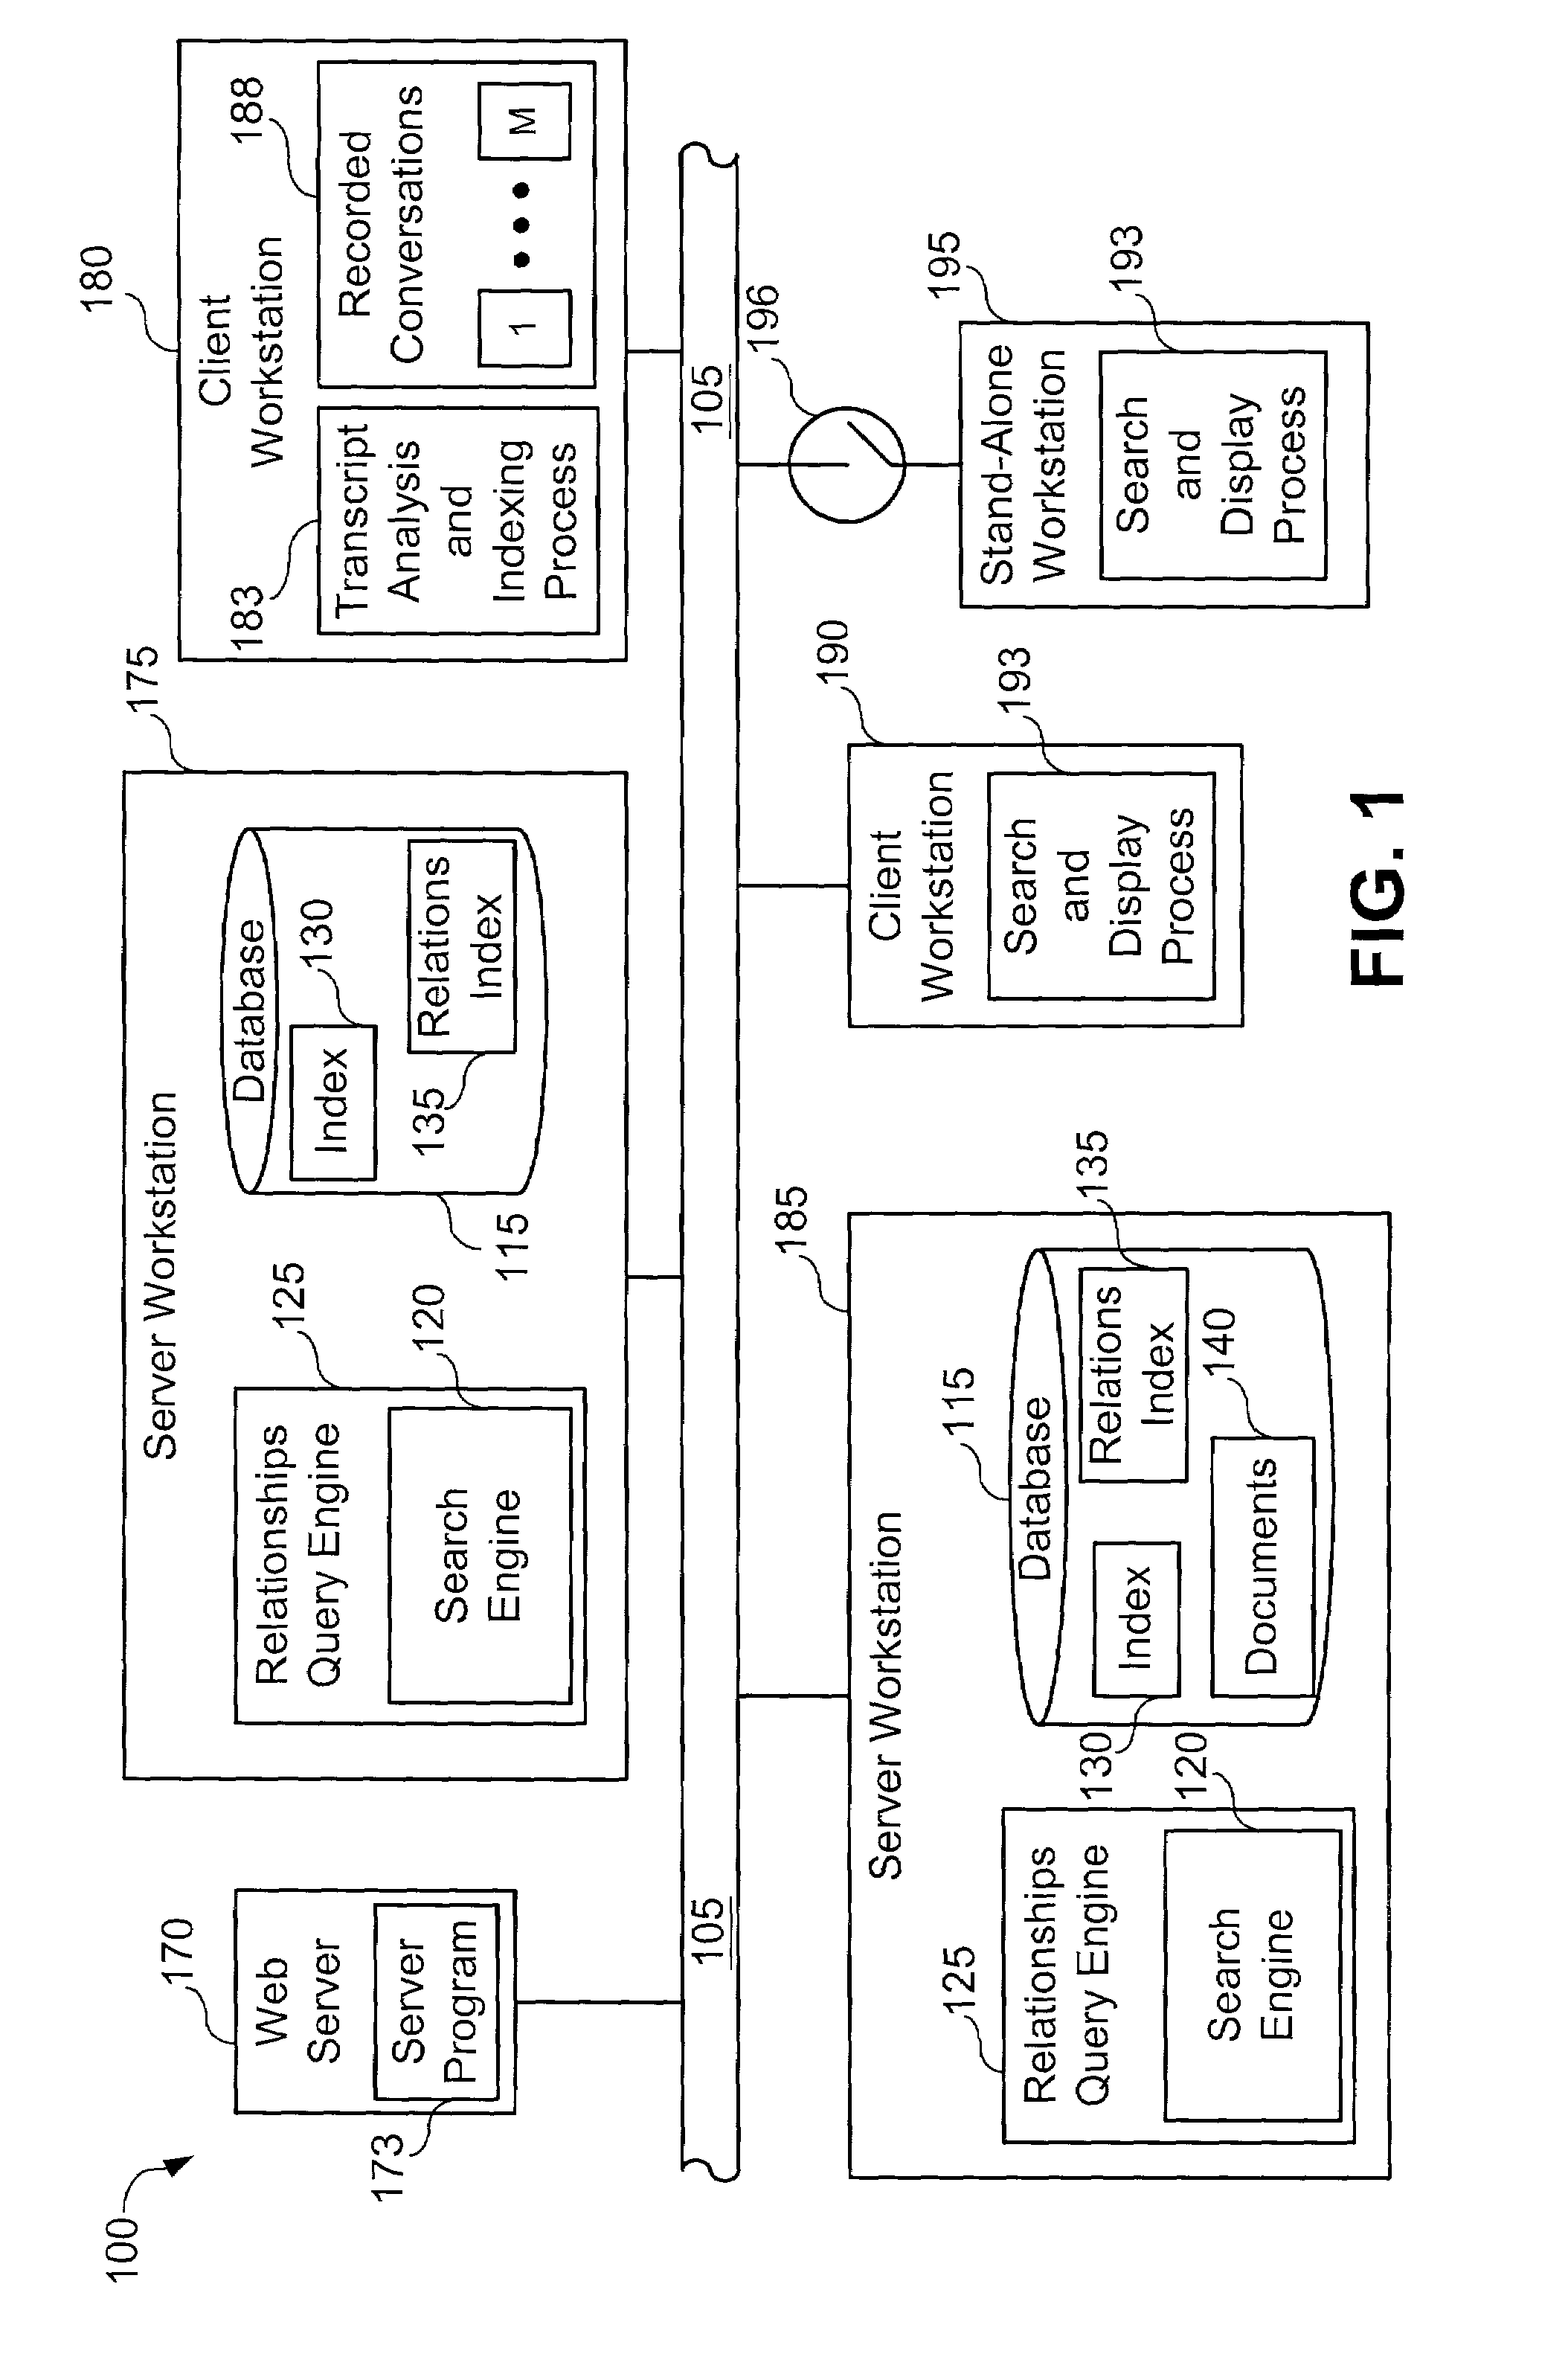 System and method for searching, analyzing and displaying text transcripts of speech after imperfect speech recognition